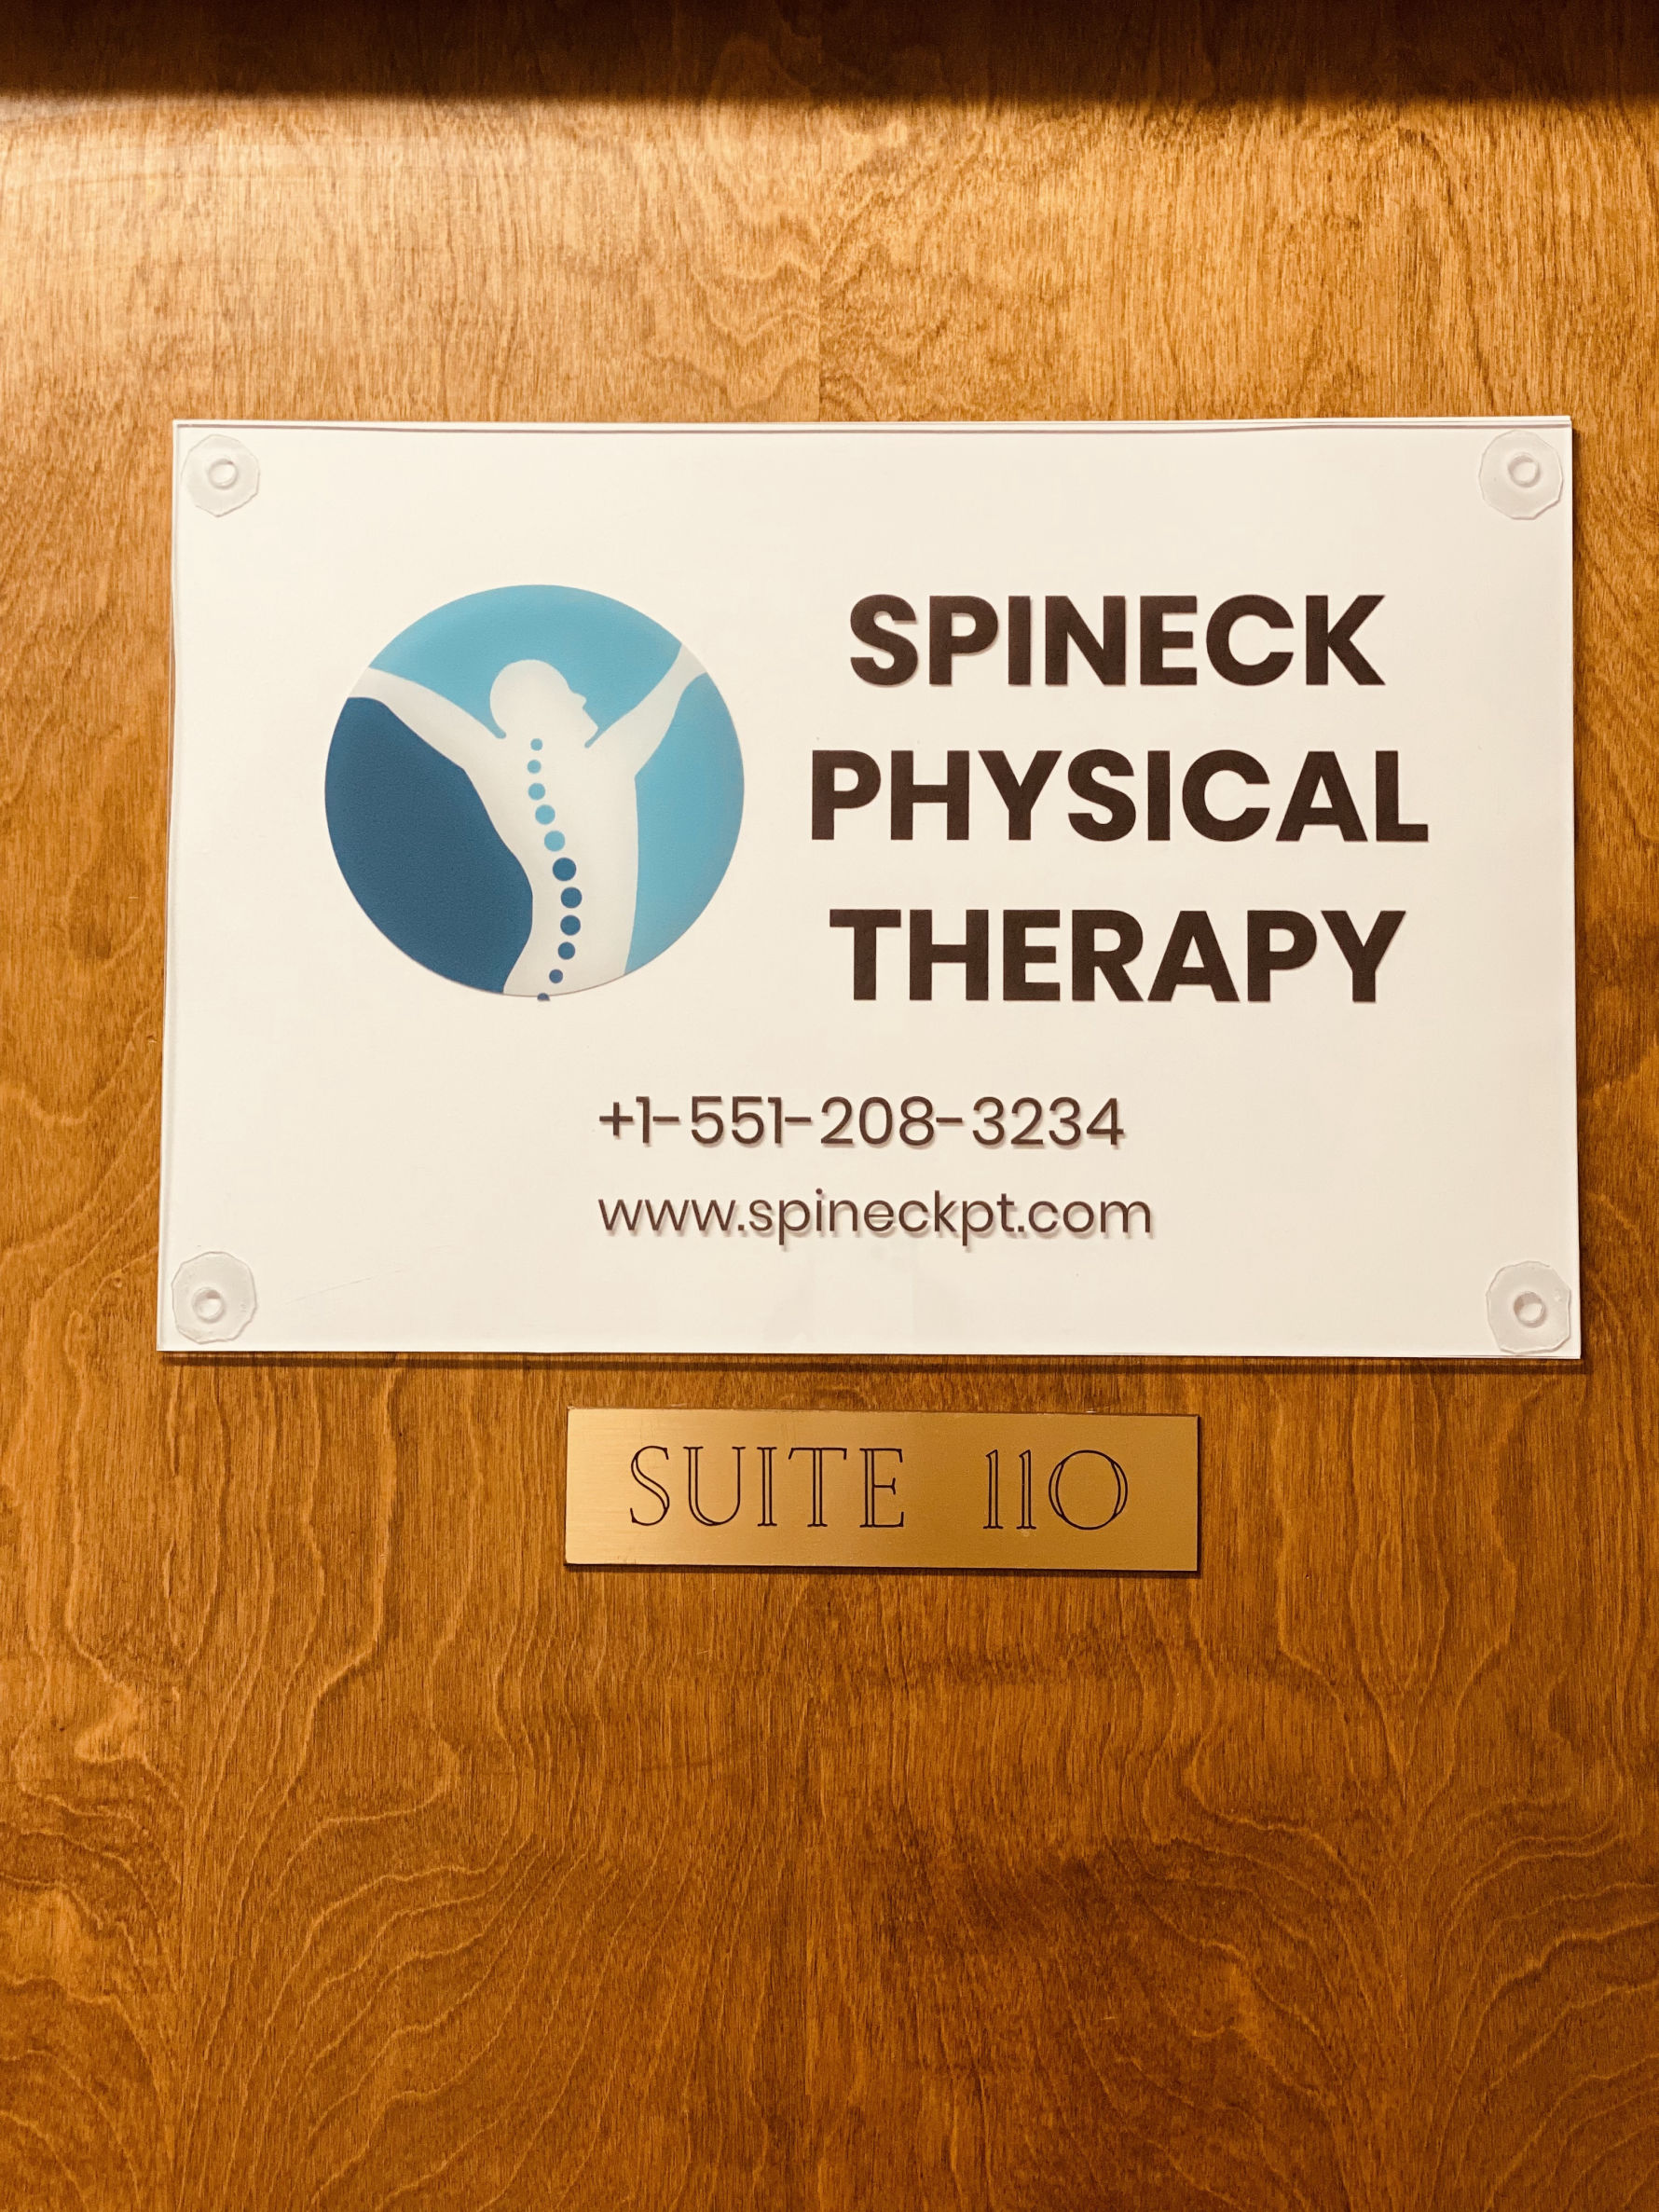 Spineck Physical Therapy